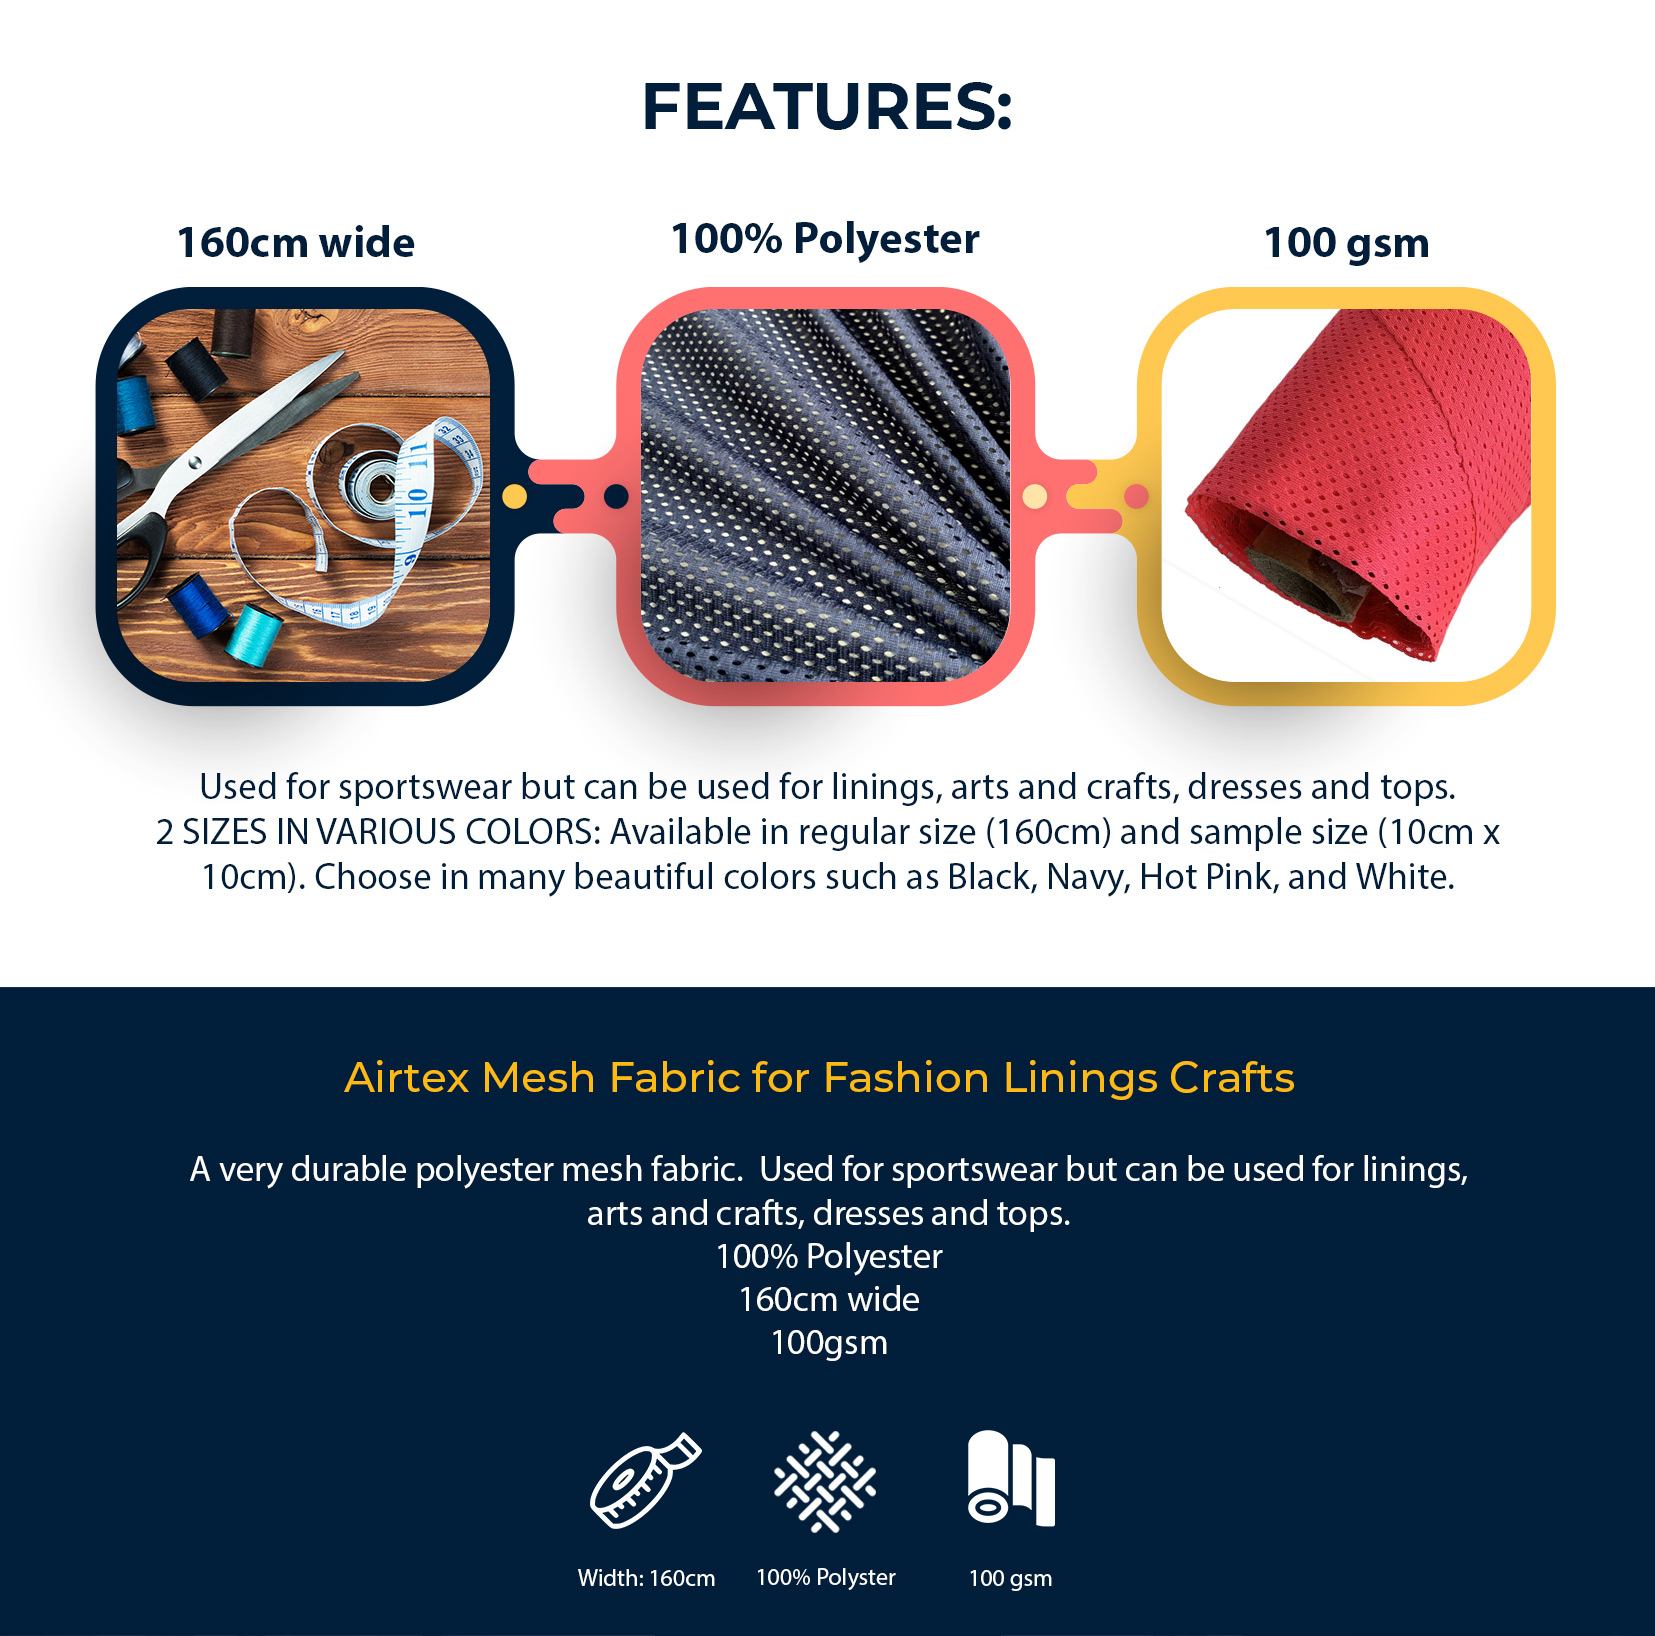 Airtex Mesh Fabric for Fashion Linings Crafts Features